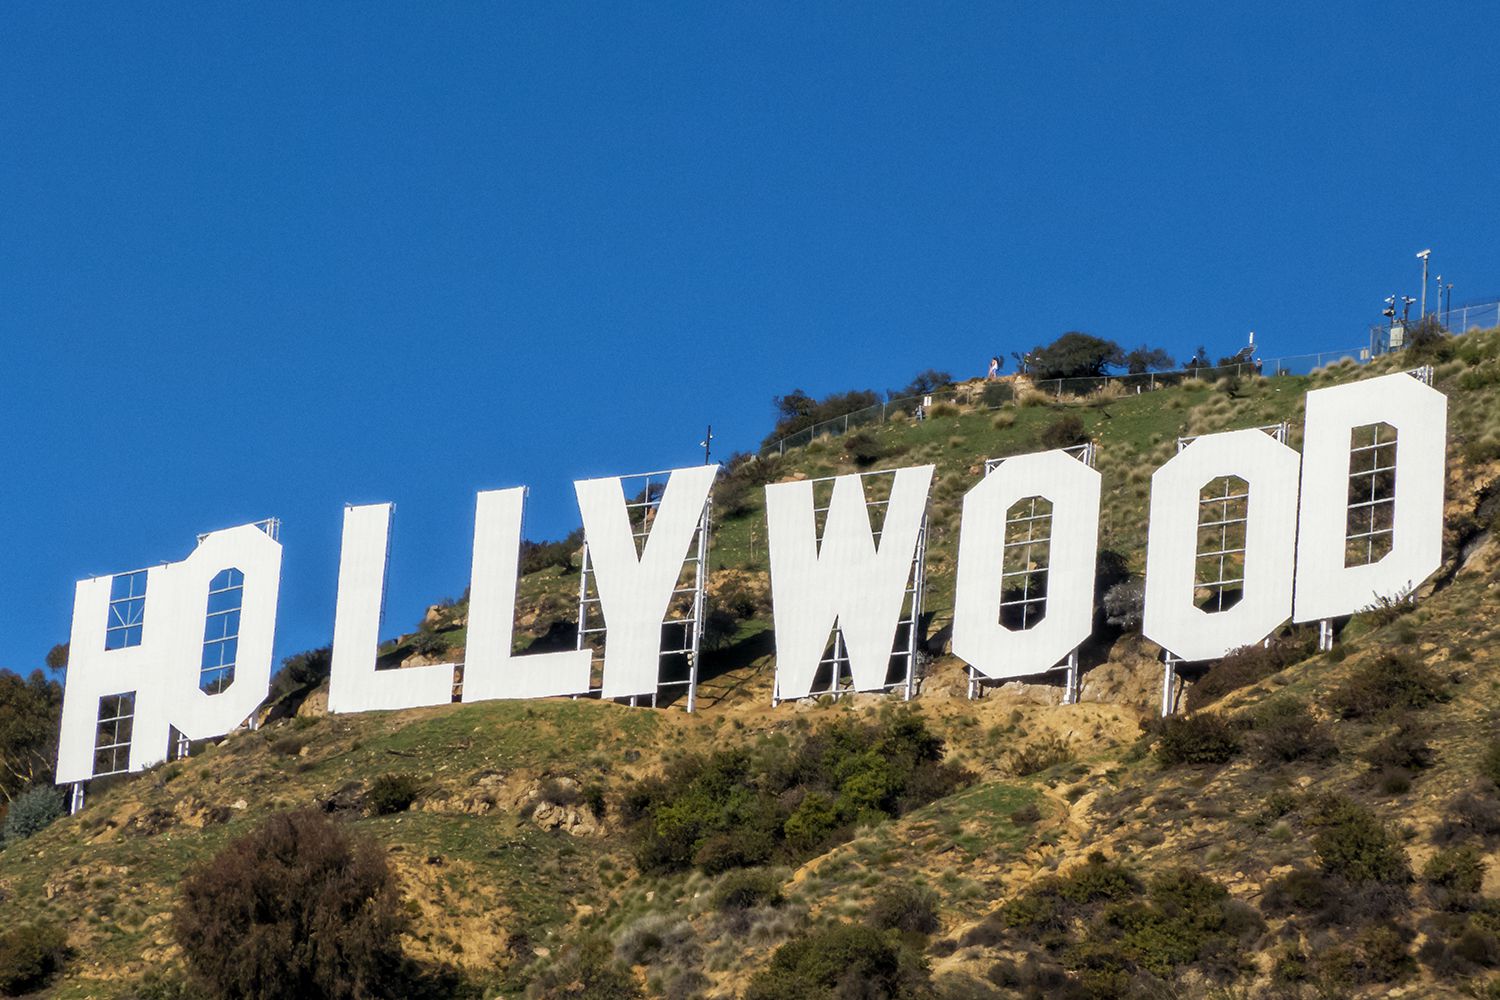 12 Top Things To Do in Hollywood - and Where They Are